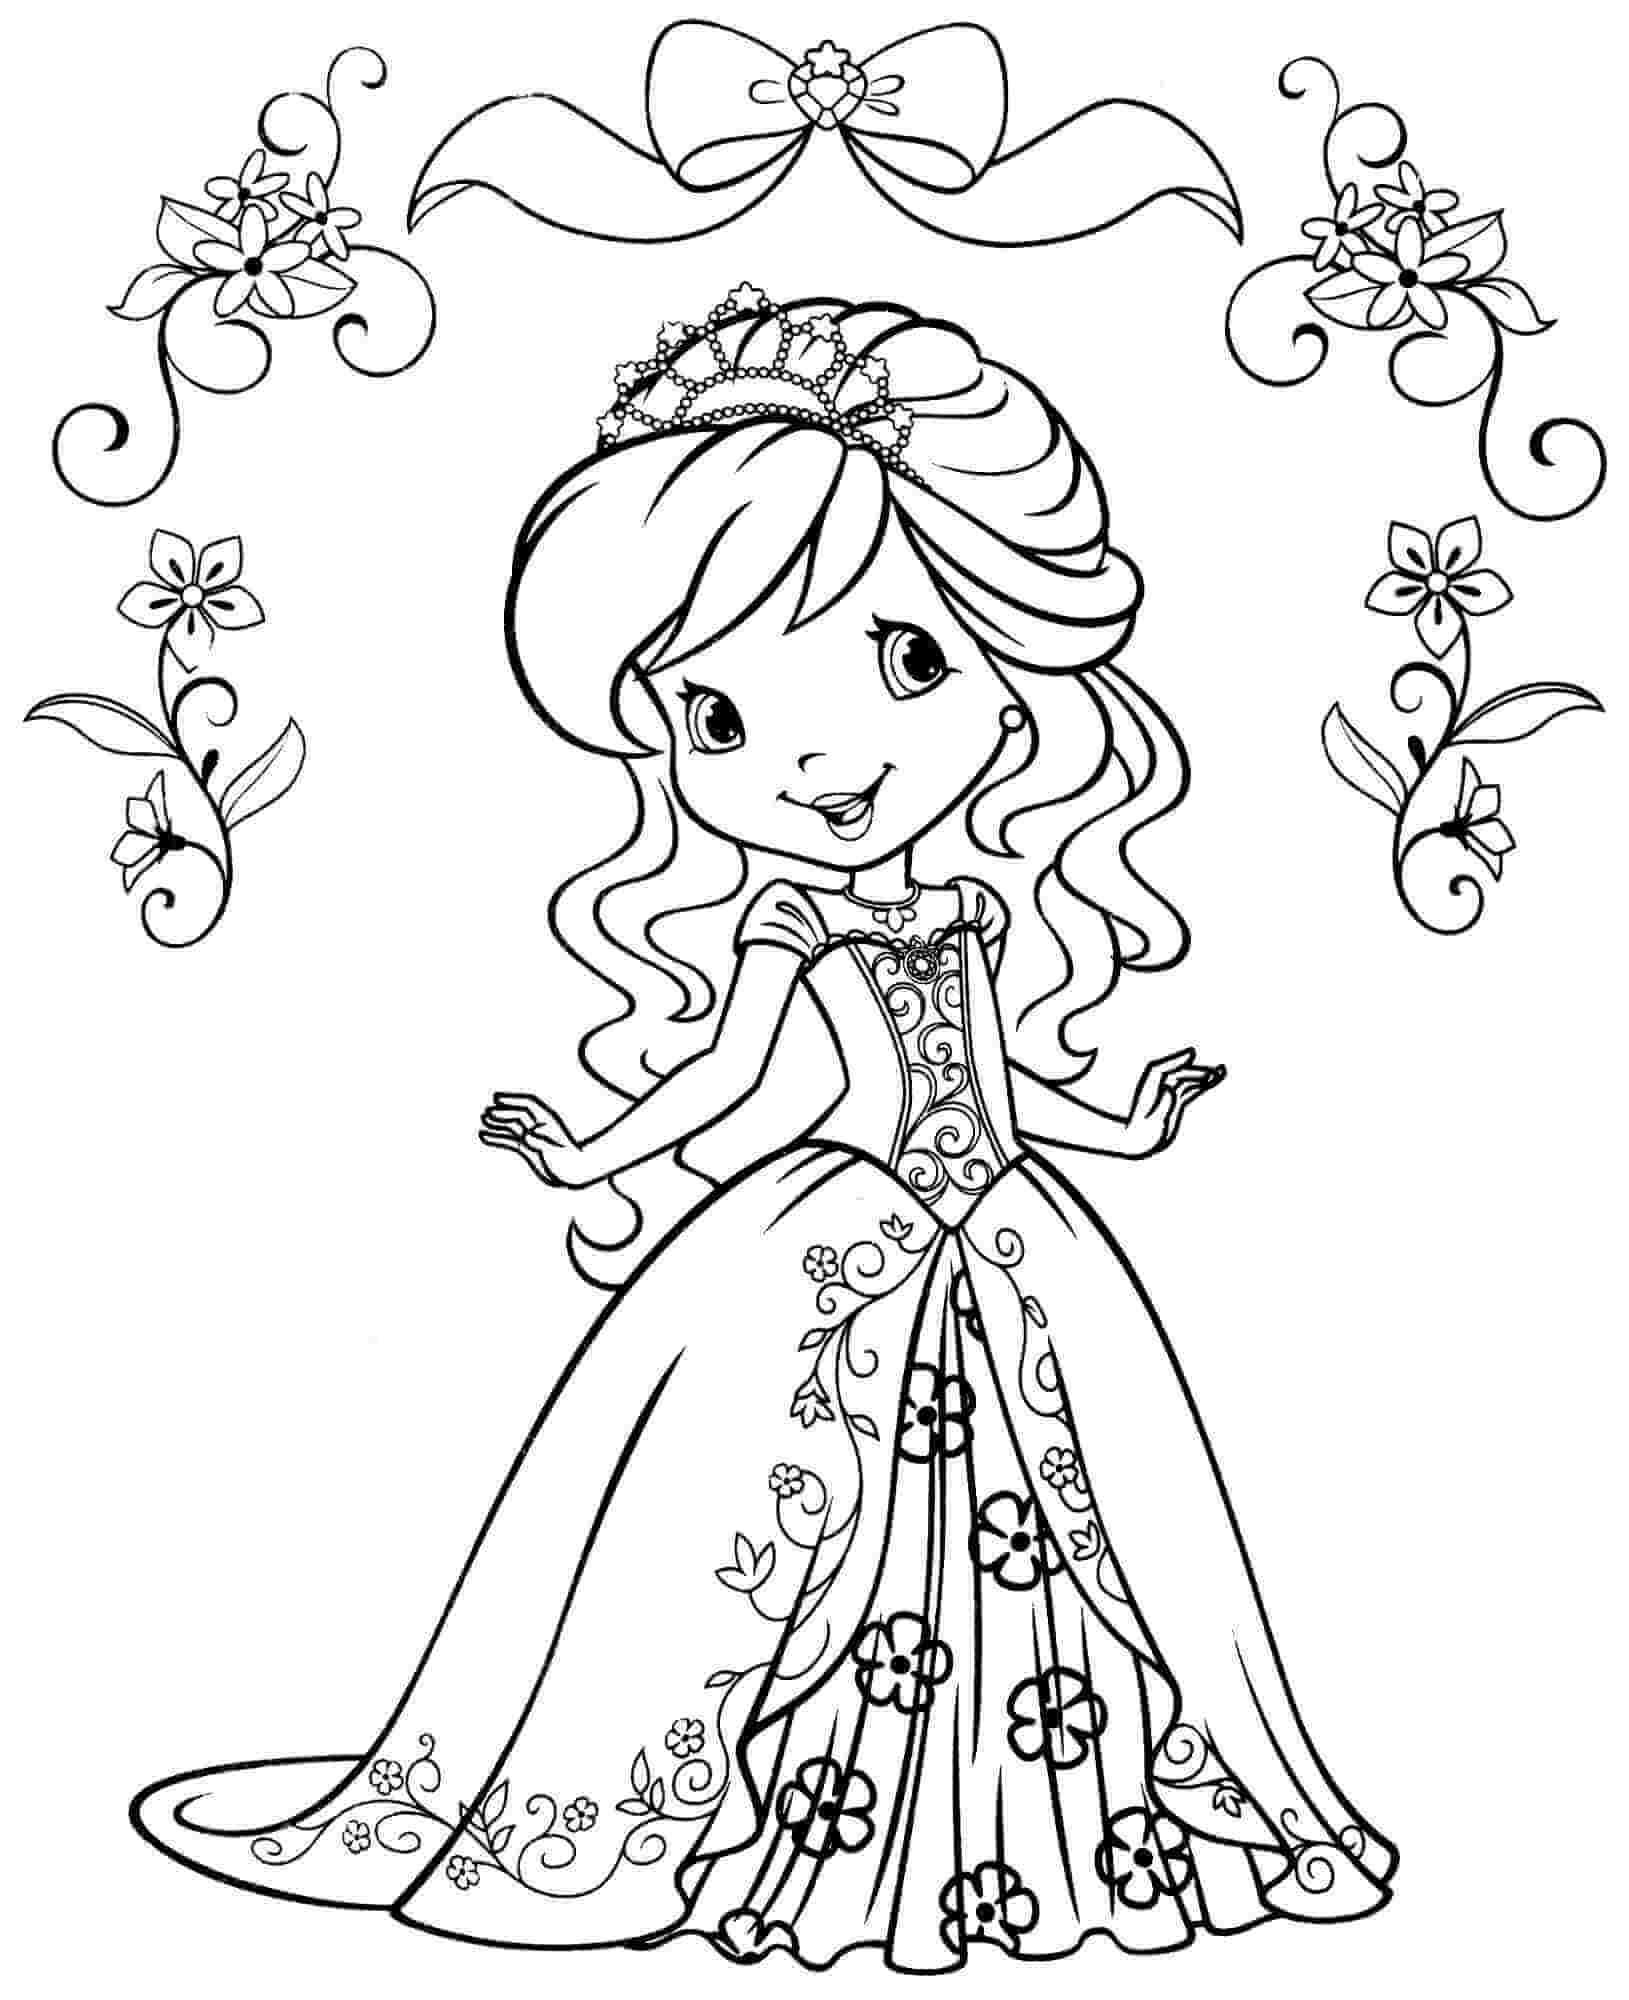 Free Printable Valentine's Day Coloring Pages